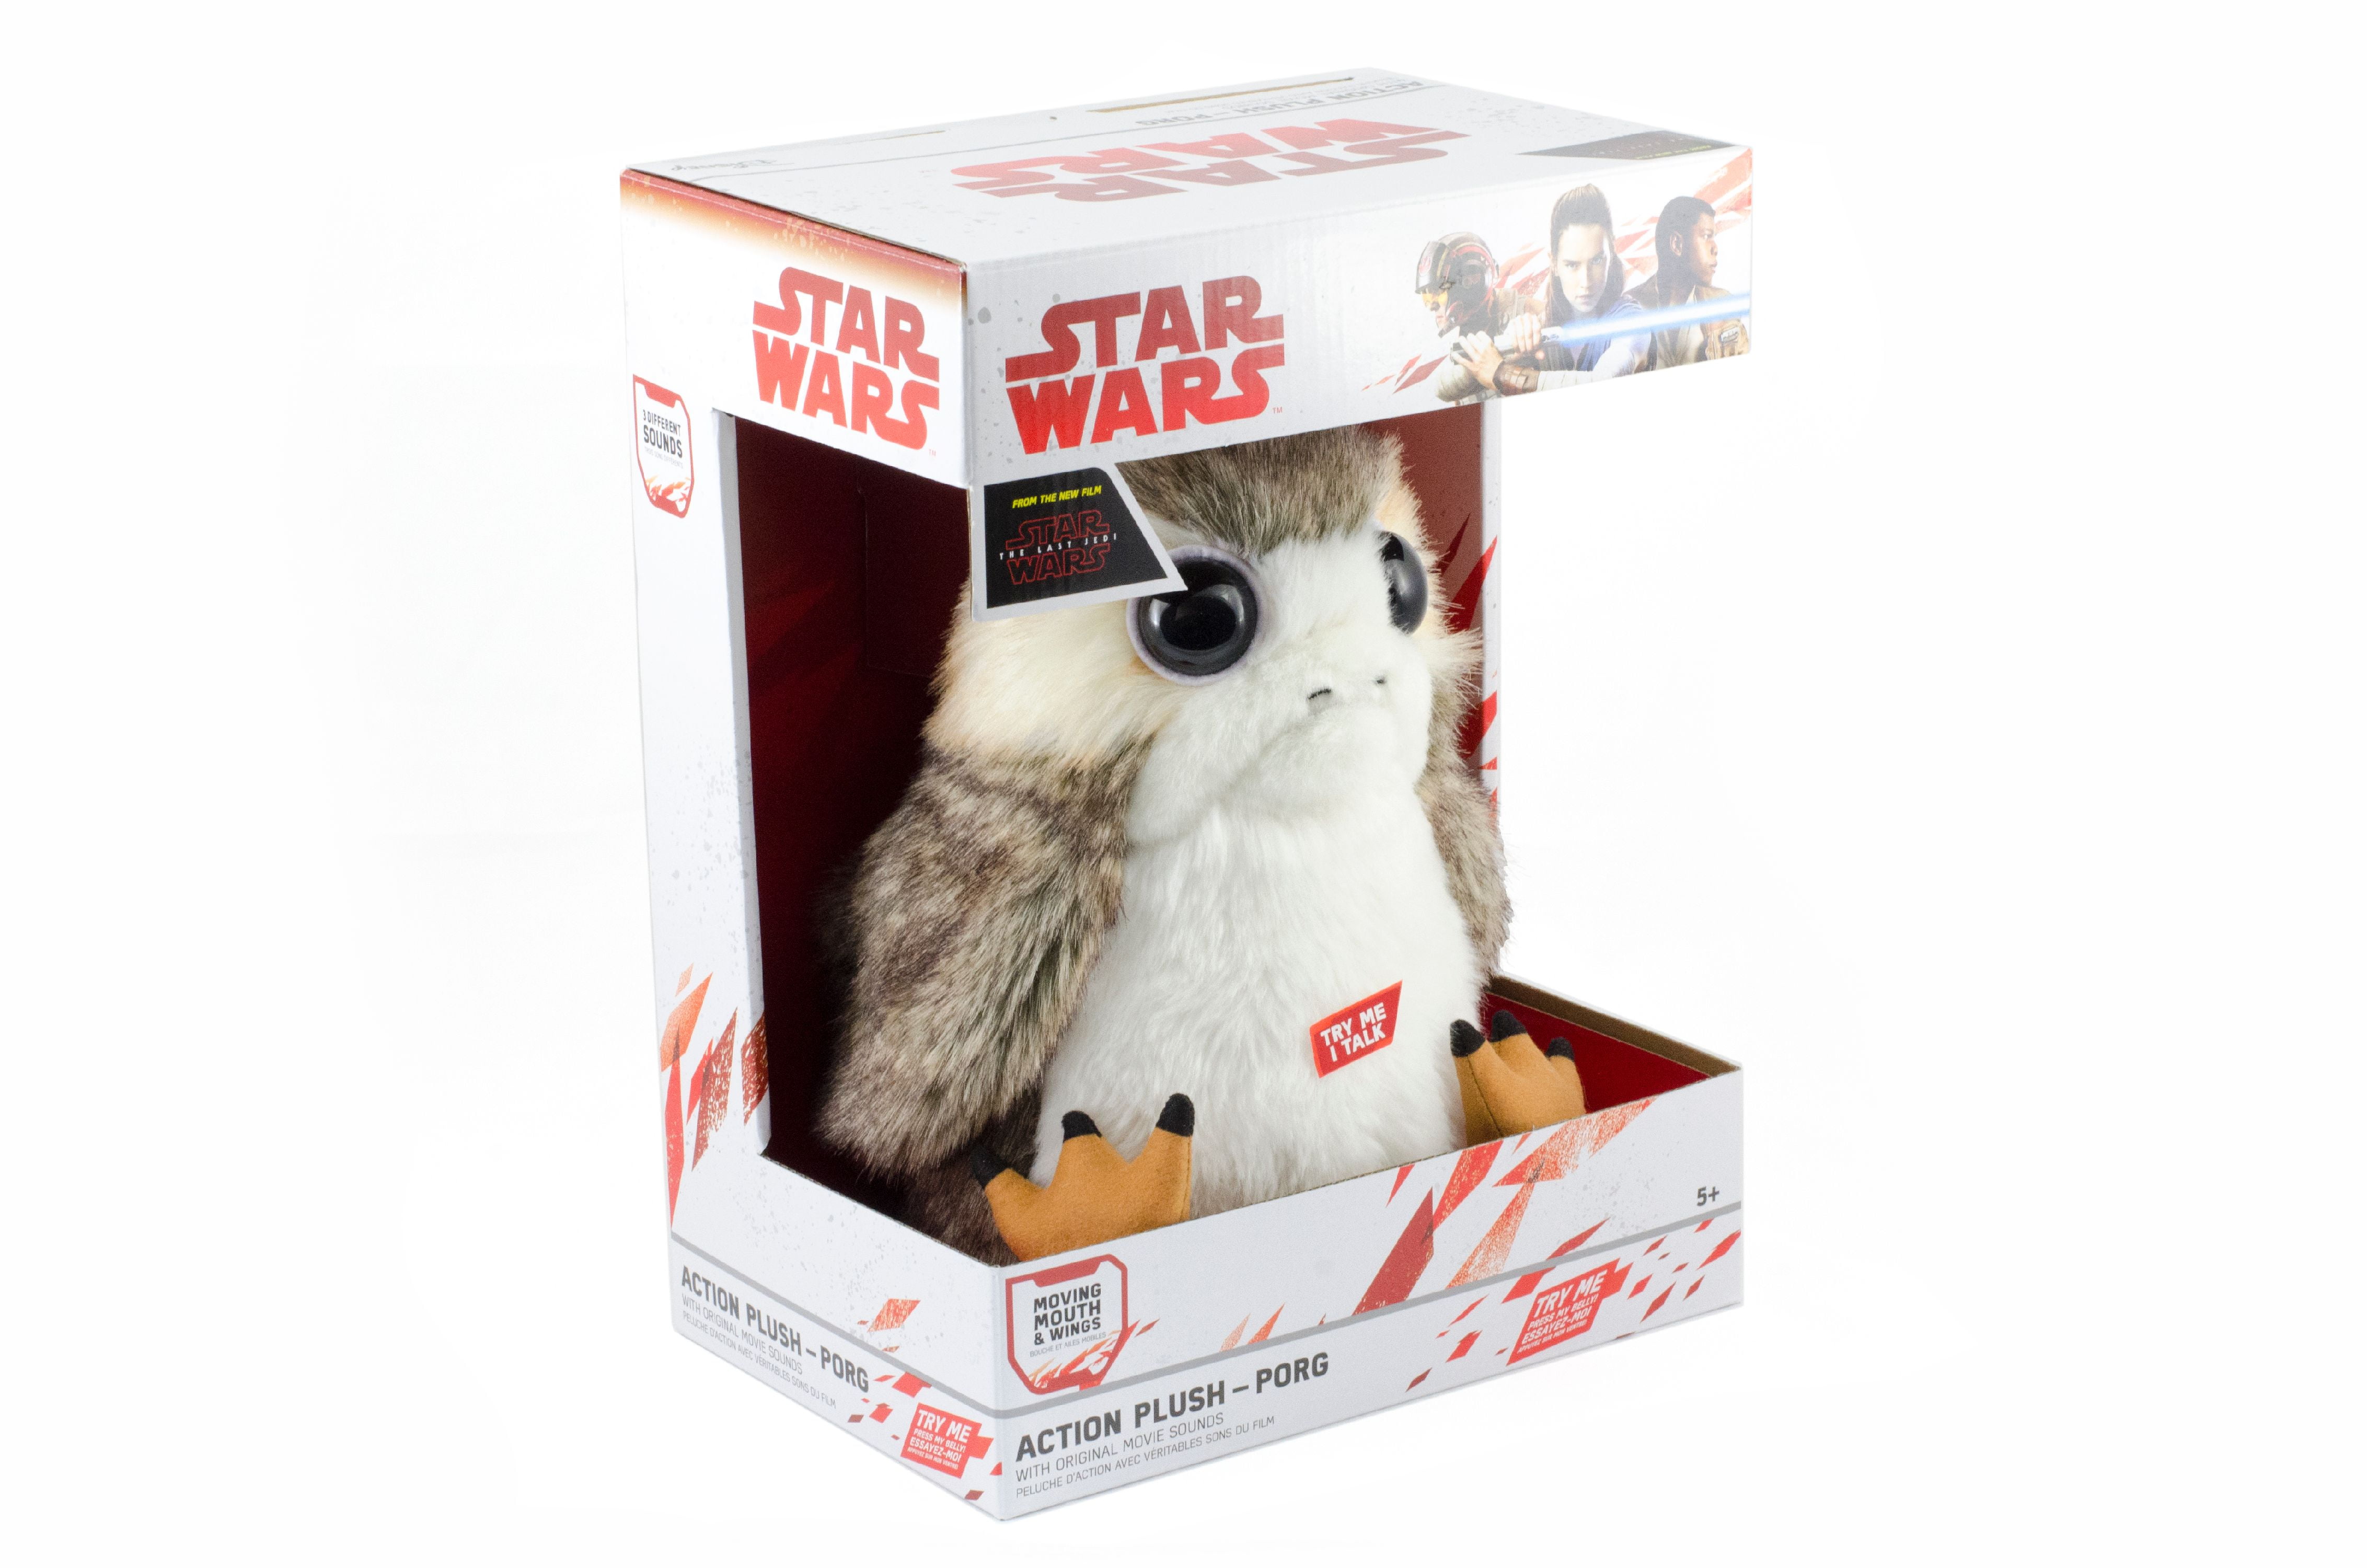 NEW BOXED OFFICIAL STAR WARS E8 PORG MUSICAL DANCING PLUSH SOFT TOY 